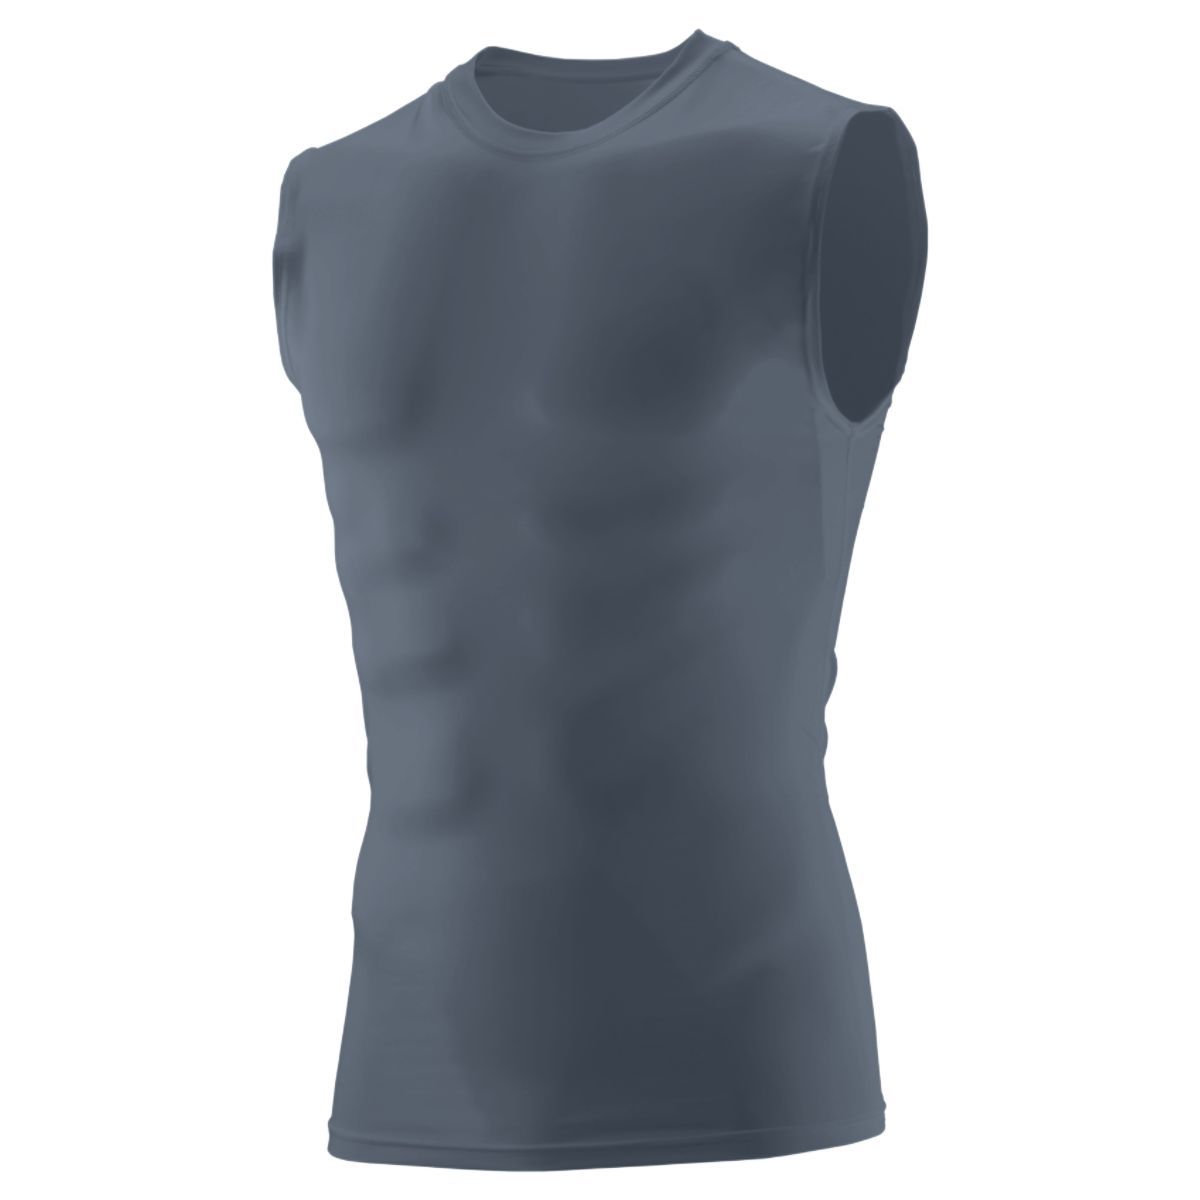 Augusta Sportswear Hyperform Compression Sleeveless Tee in Graphite  -Part of the Adult, Adult-Tee-Shirt, T-Shirts, Augusta-Products, Shirts product lines at KanaleyCreations.com